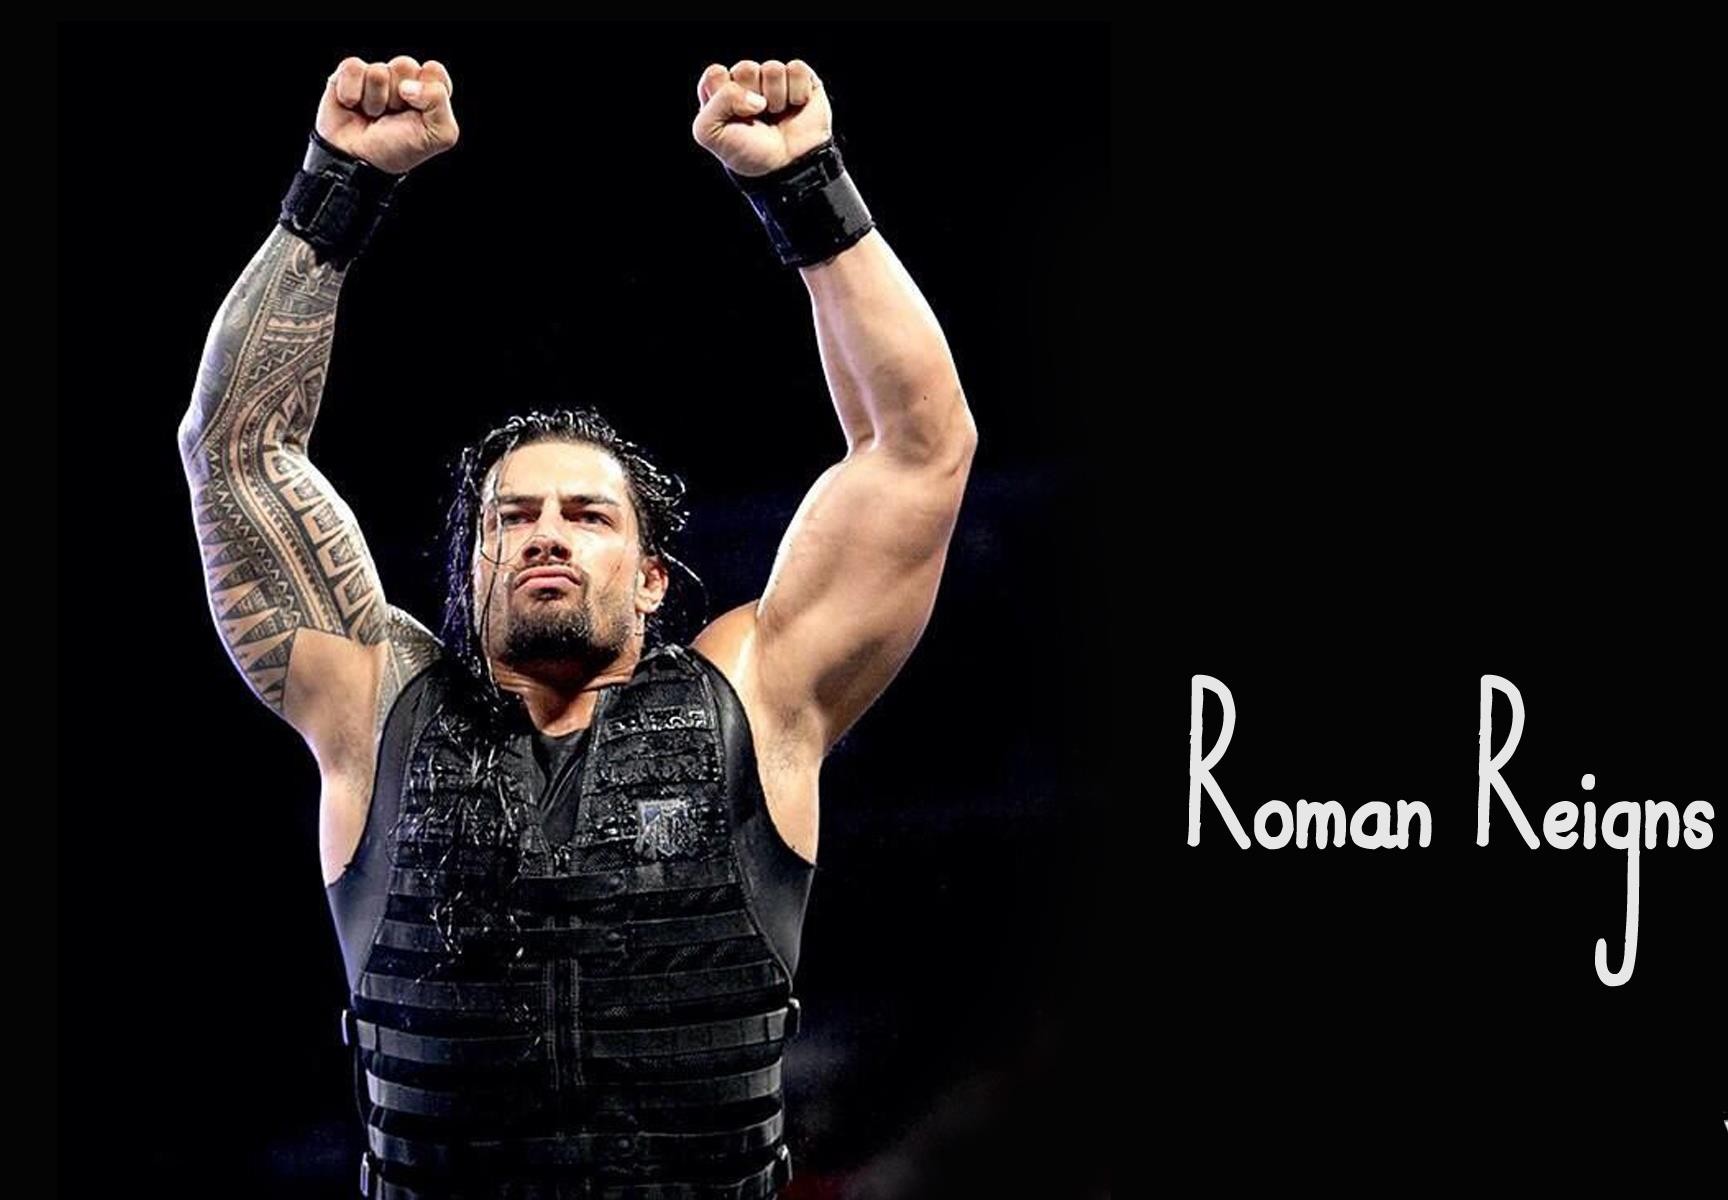 99+] The Rock And Roman Reigns Wallpapers - WallpaperSafari